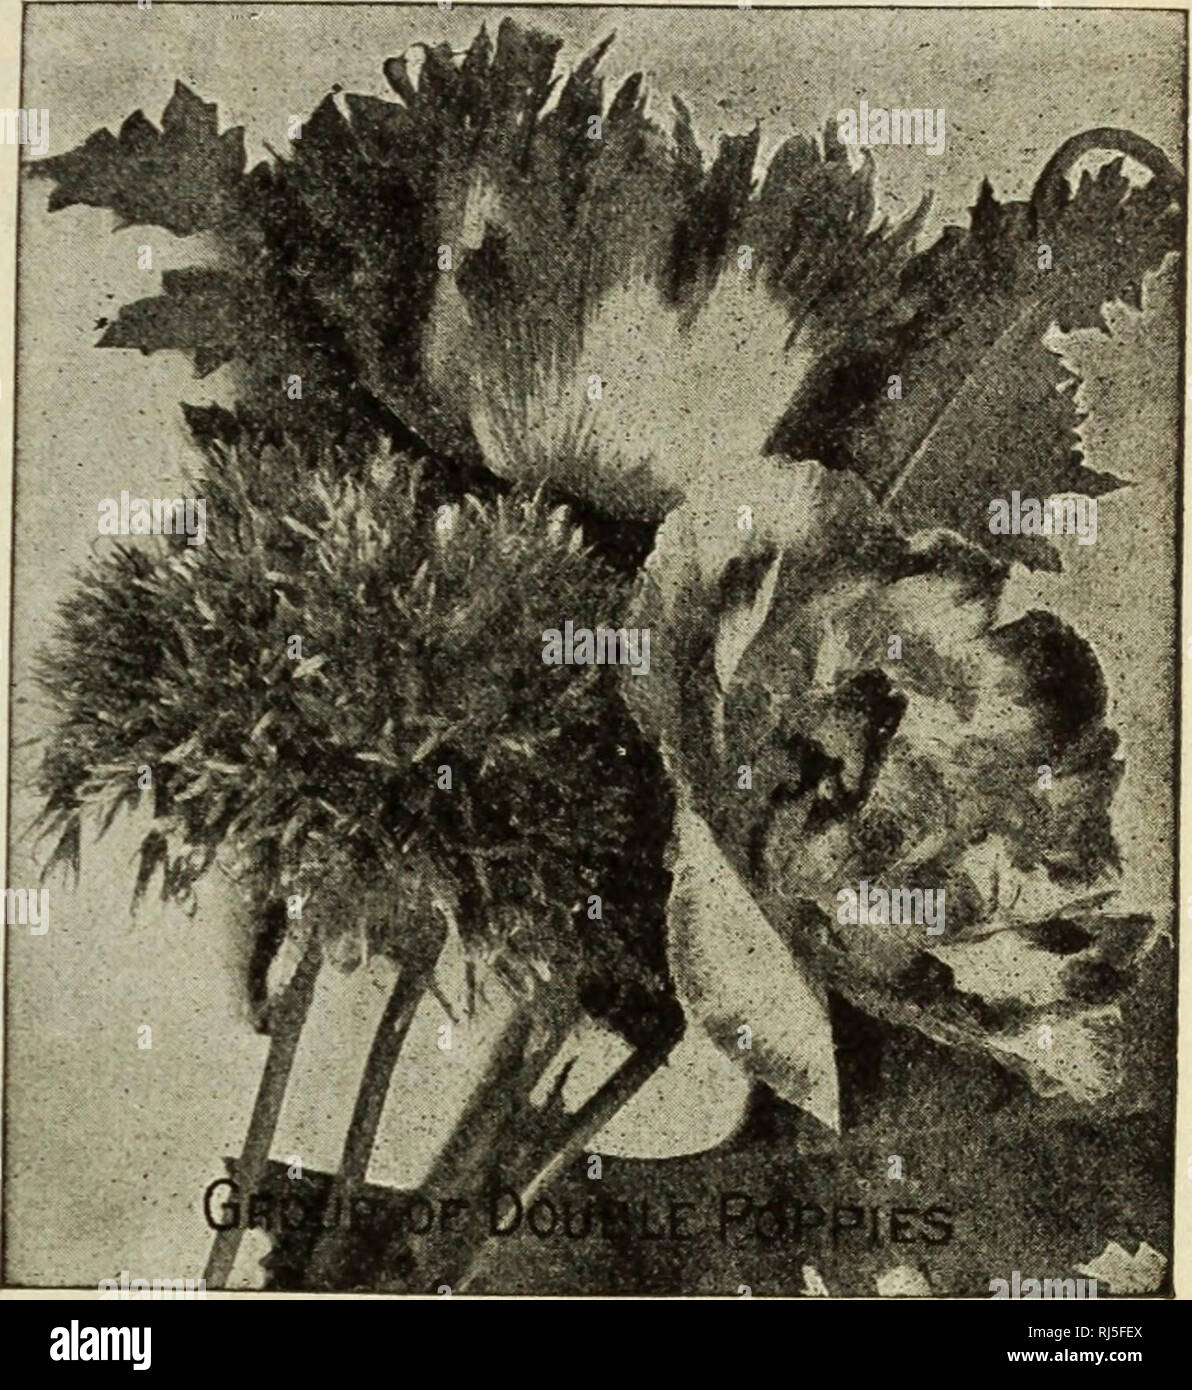 . Choice flower seeds 1912 : compliments of Miss Emma V. White. Flowers Seeds Catalogs; Seeds Catalogs; Vegetables Seeds Catalogs. Cleburne, Kans.---&quot;I have been getting seeds from you lor several years and have extra fine flowers,&quot; —Mrs. Geo. Hansen. POPPIES SHIRLEY POPPY ''Acme&quot; Mixture In an effort to offer the very best in this most popular poppy, I have tried the strains of several noted growers, and am offering this year in this mix- ture a strain that cannot be excelled. It is made up of seeds of Burbank's choicest selection, together with seed from an English grower, whi Stock Photo